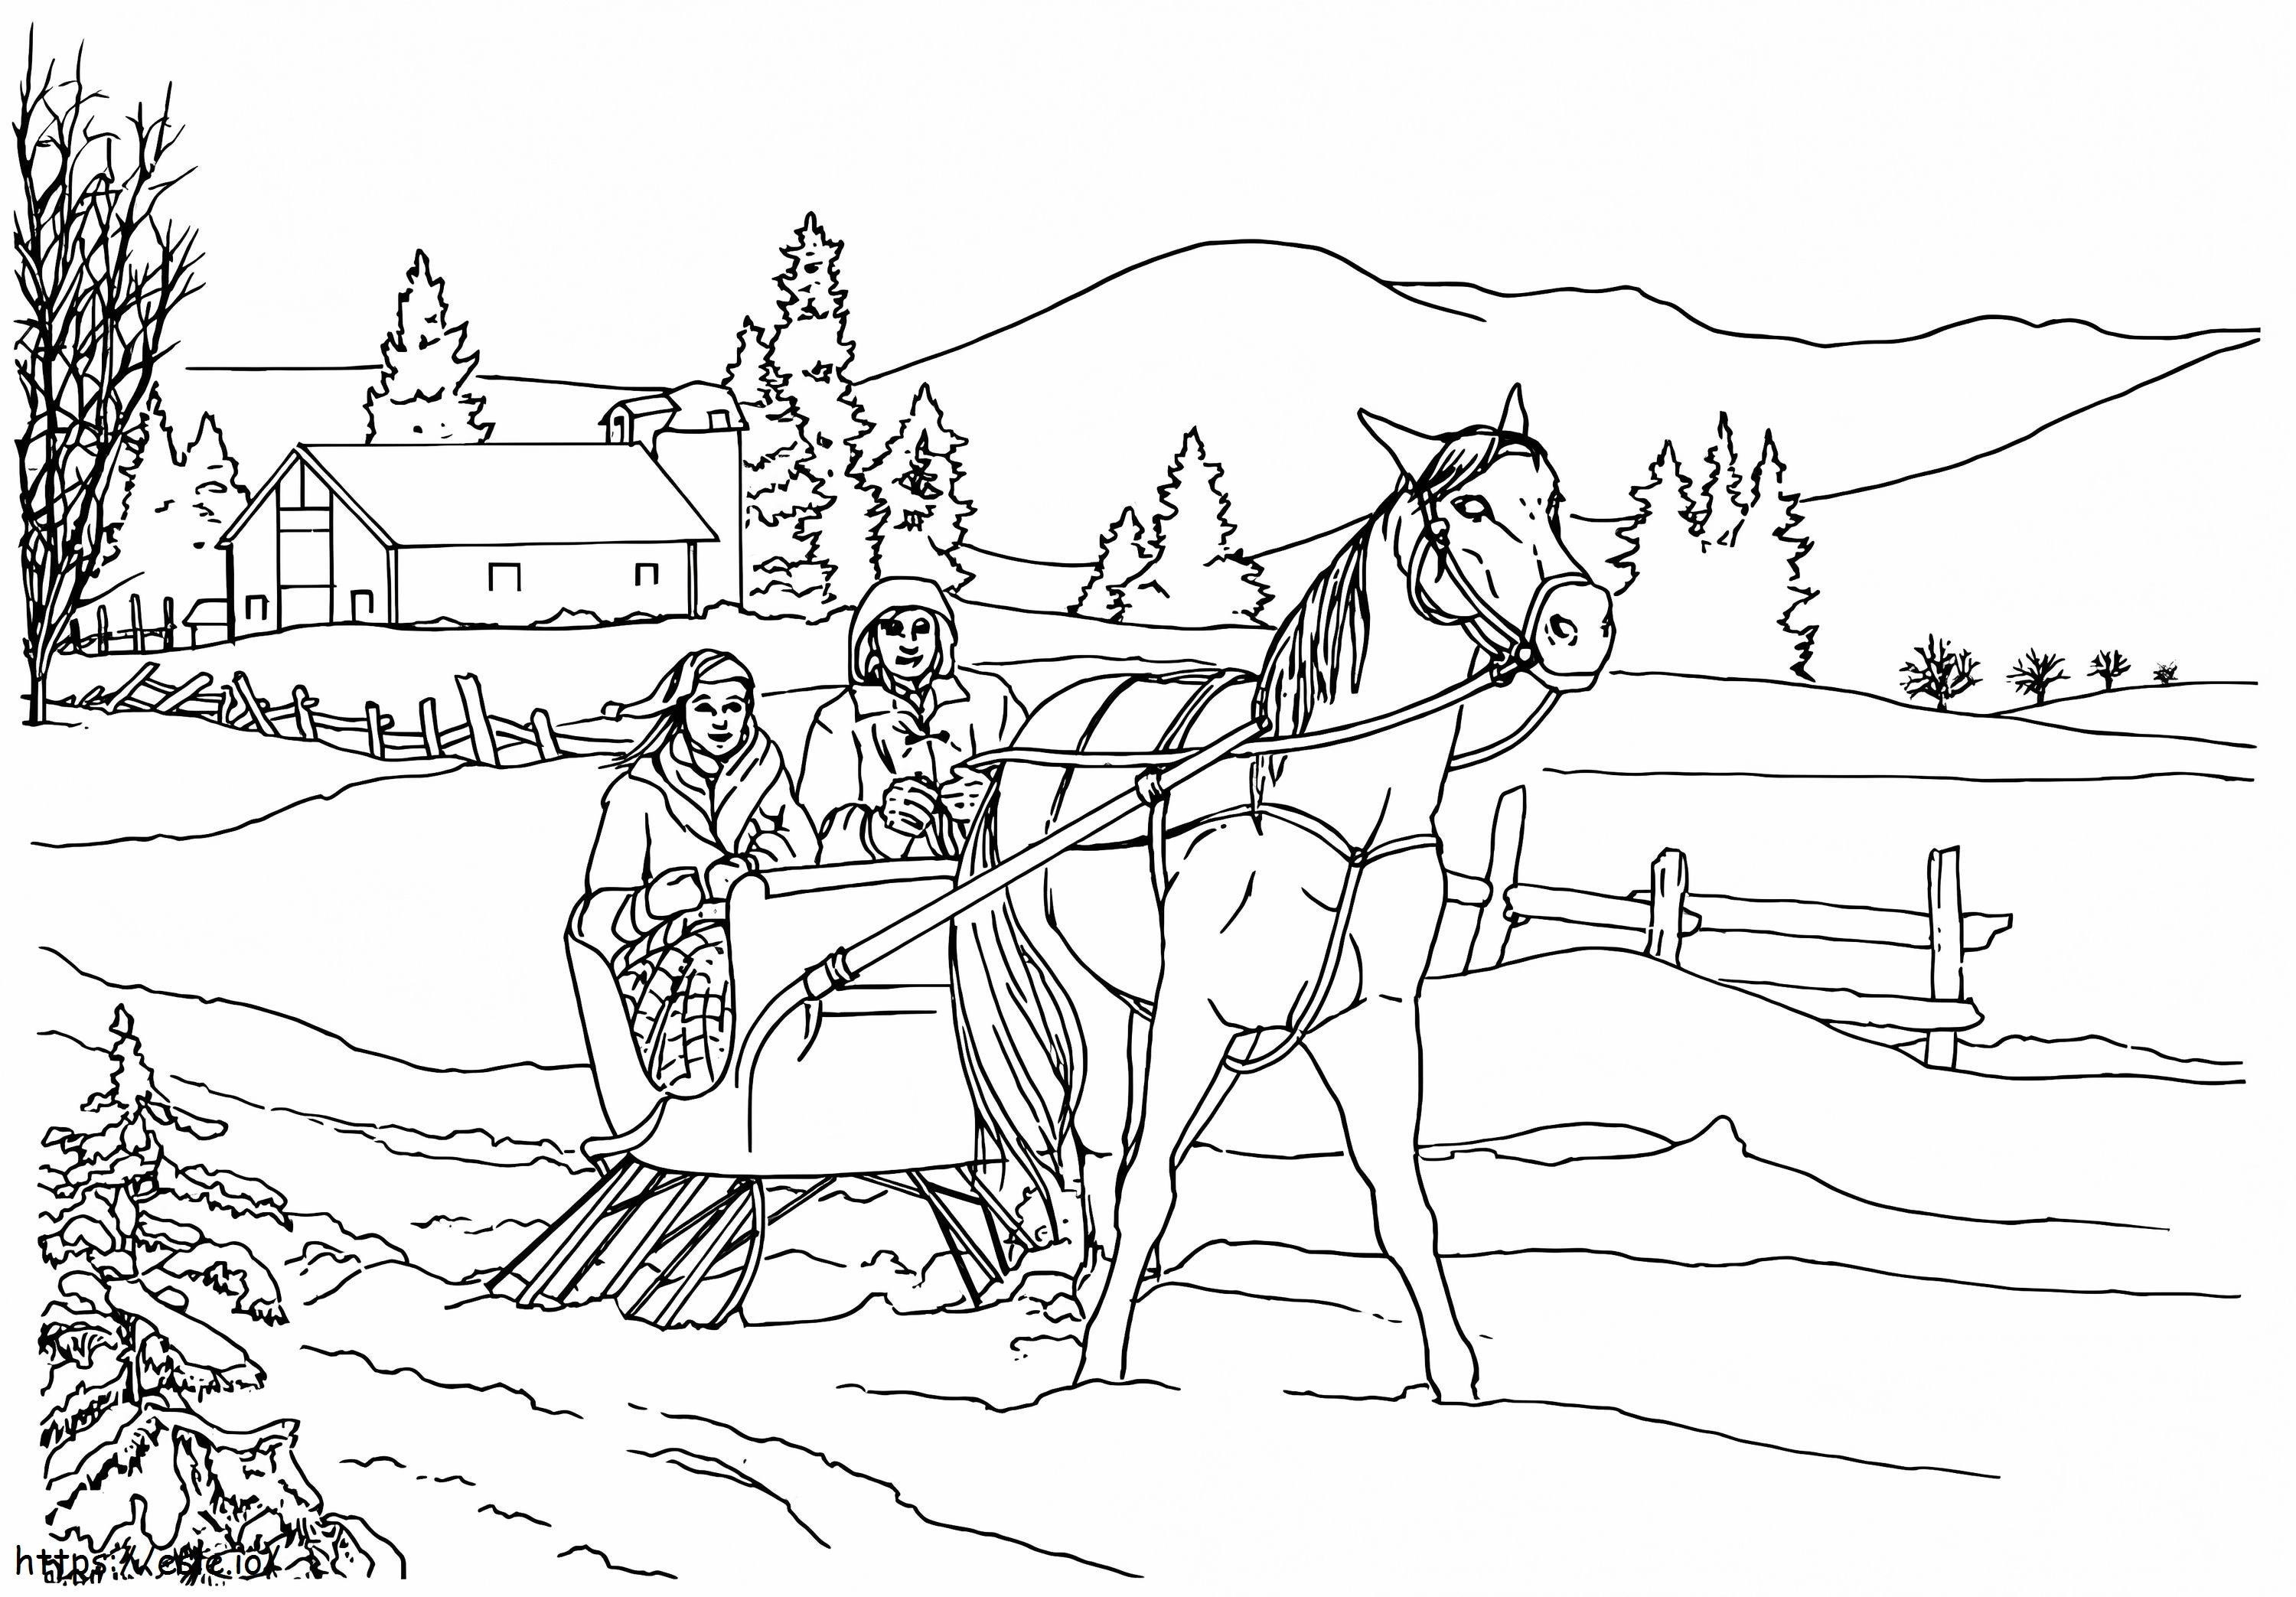 Horse And Sleigh coloring page